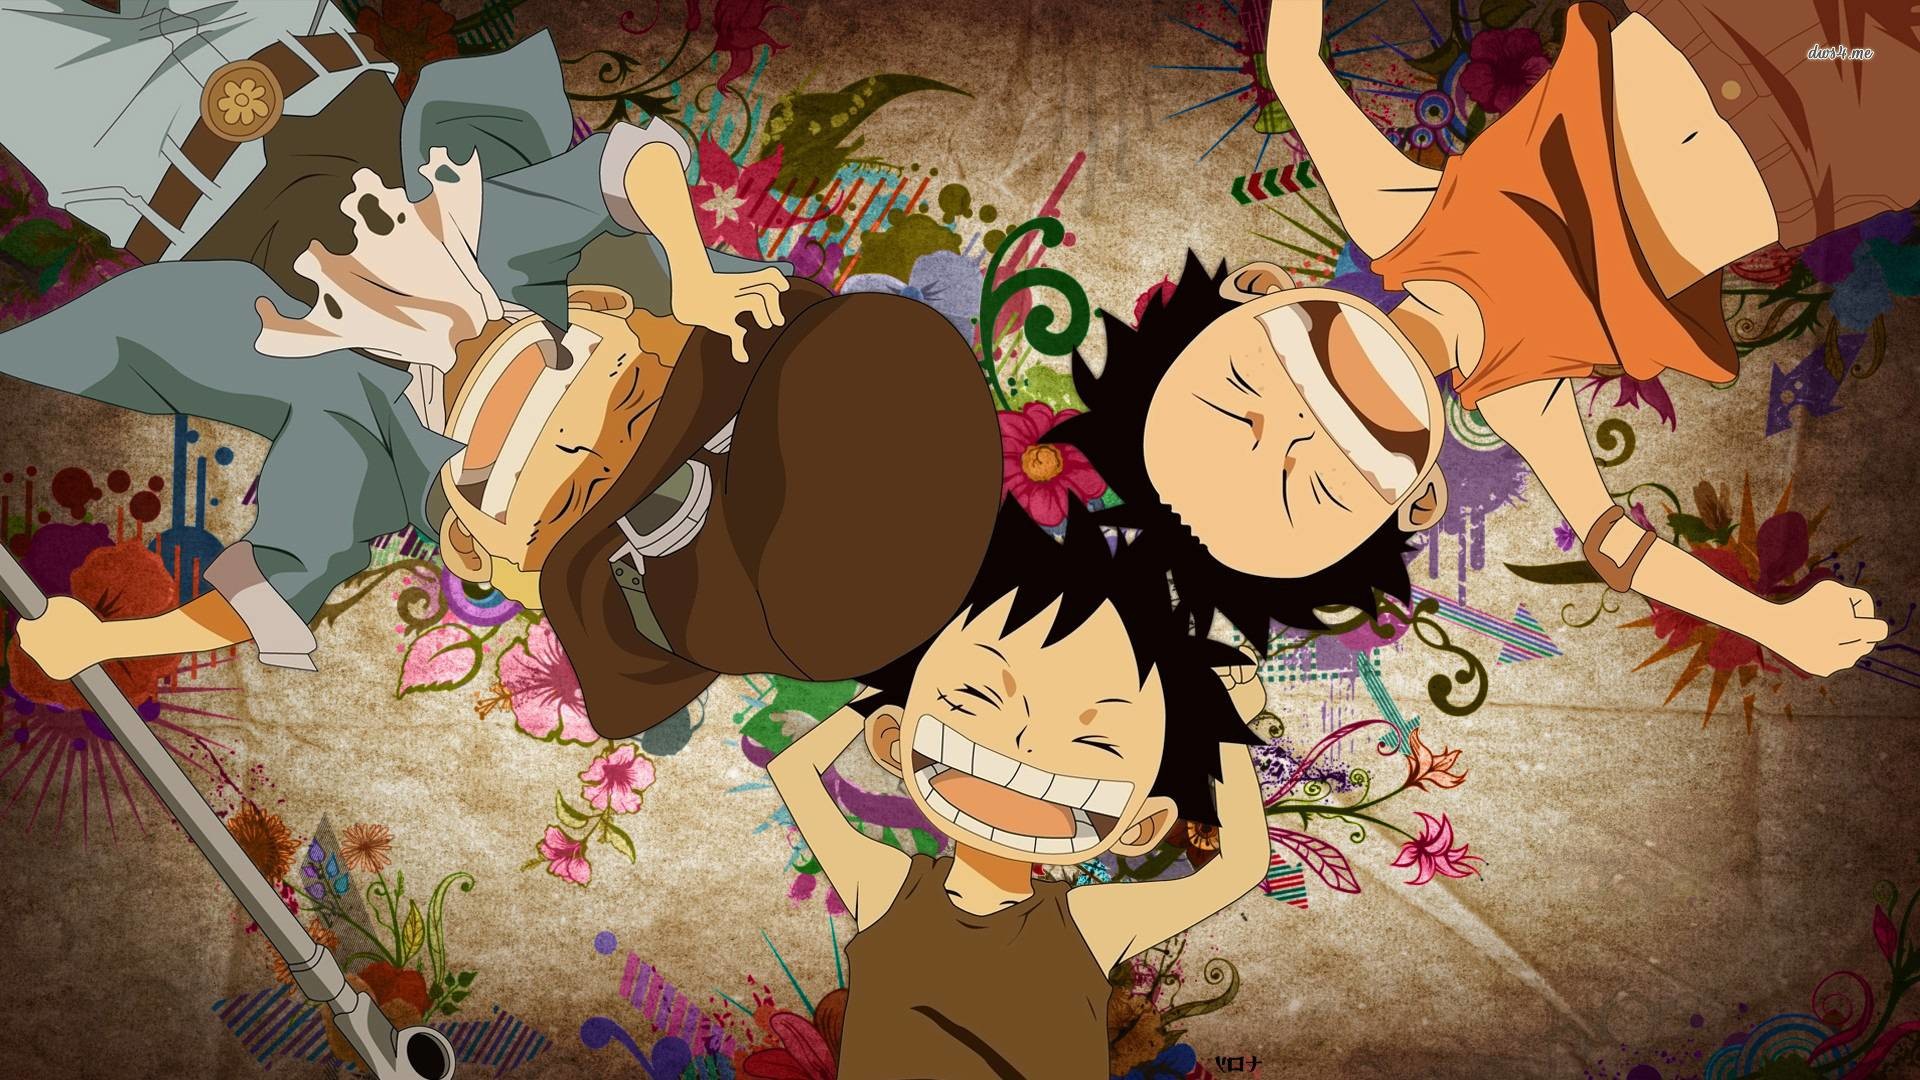 One Piece Monkey D Luffy Sabo Portgas D Ace Wallpapers Hd 1920x1080